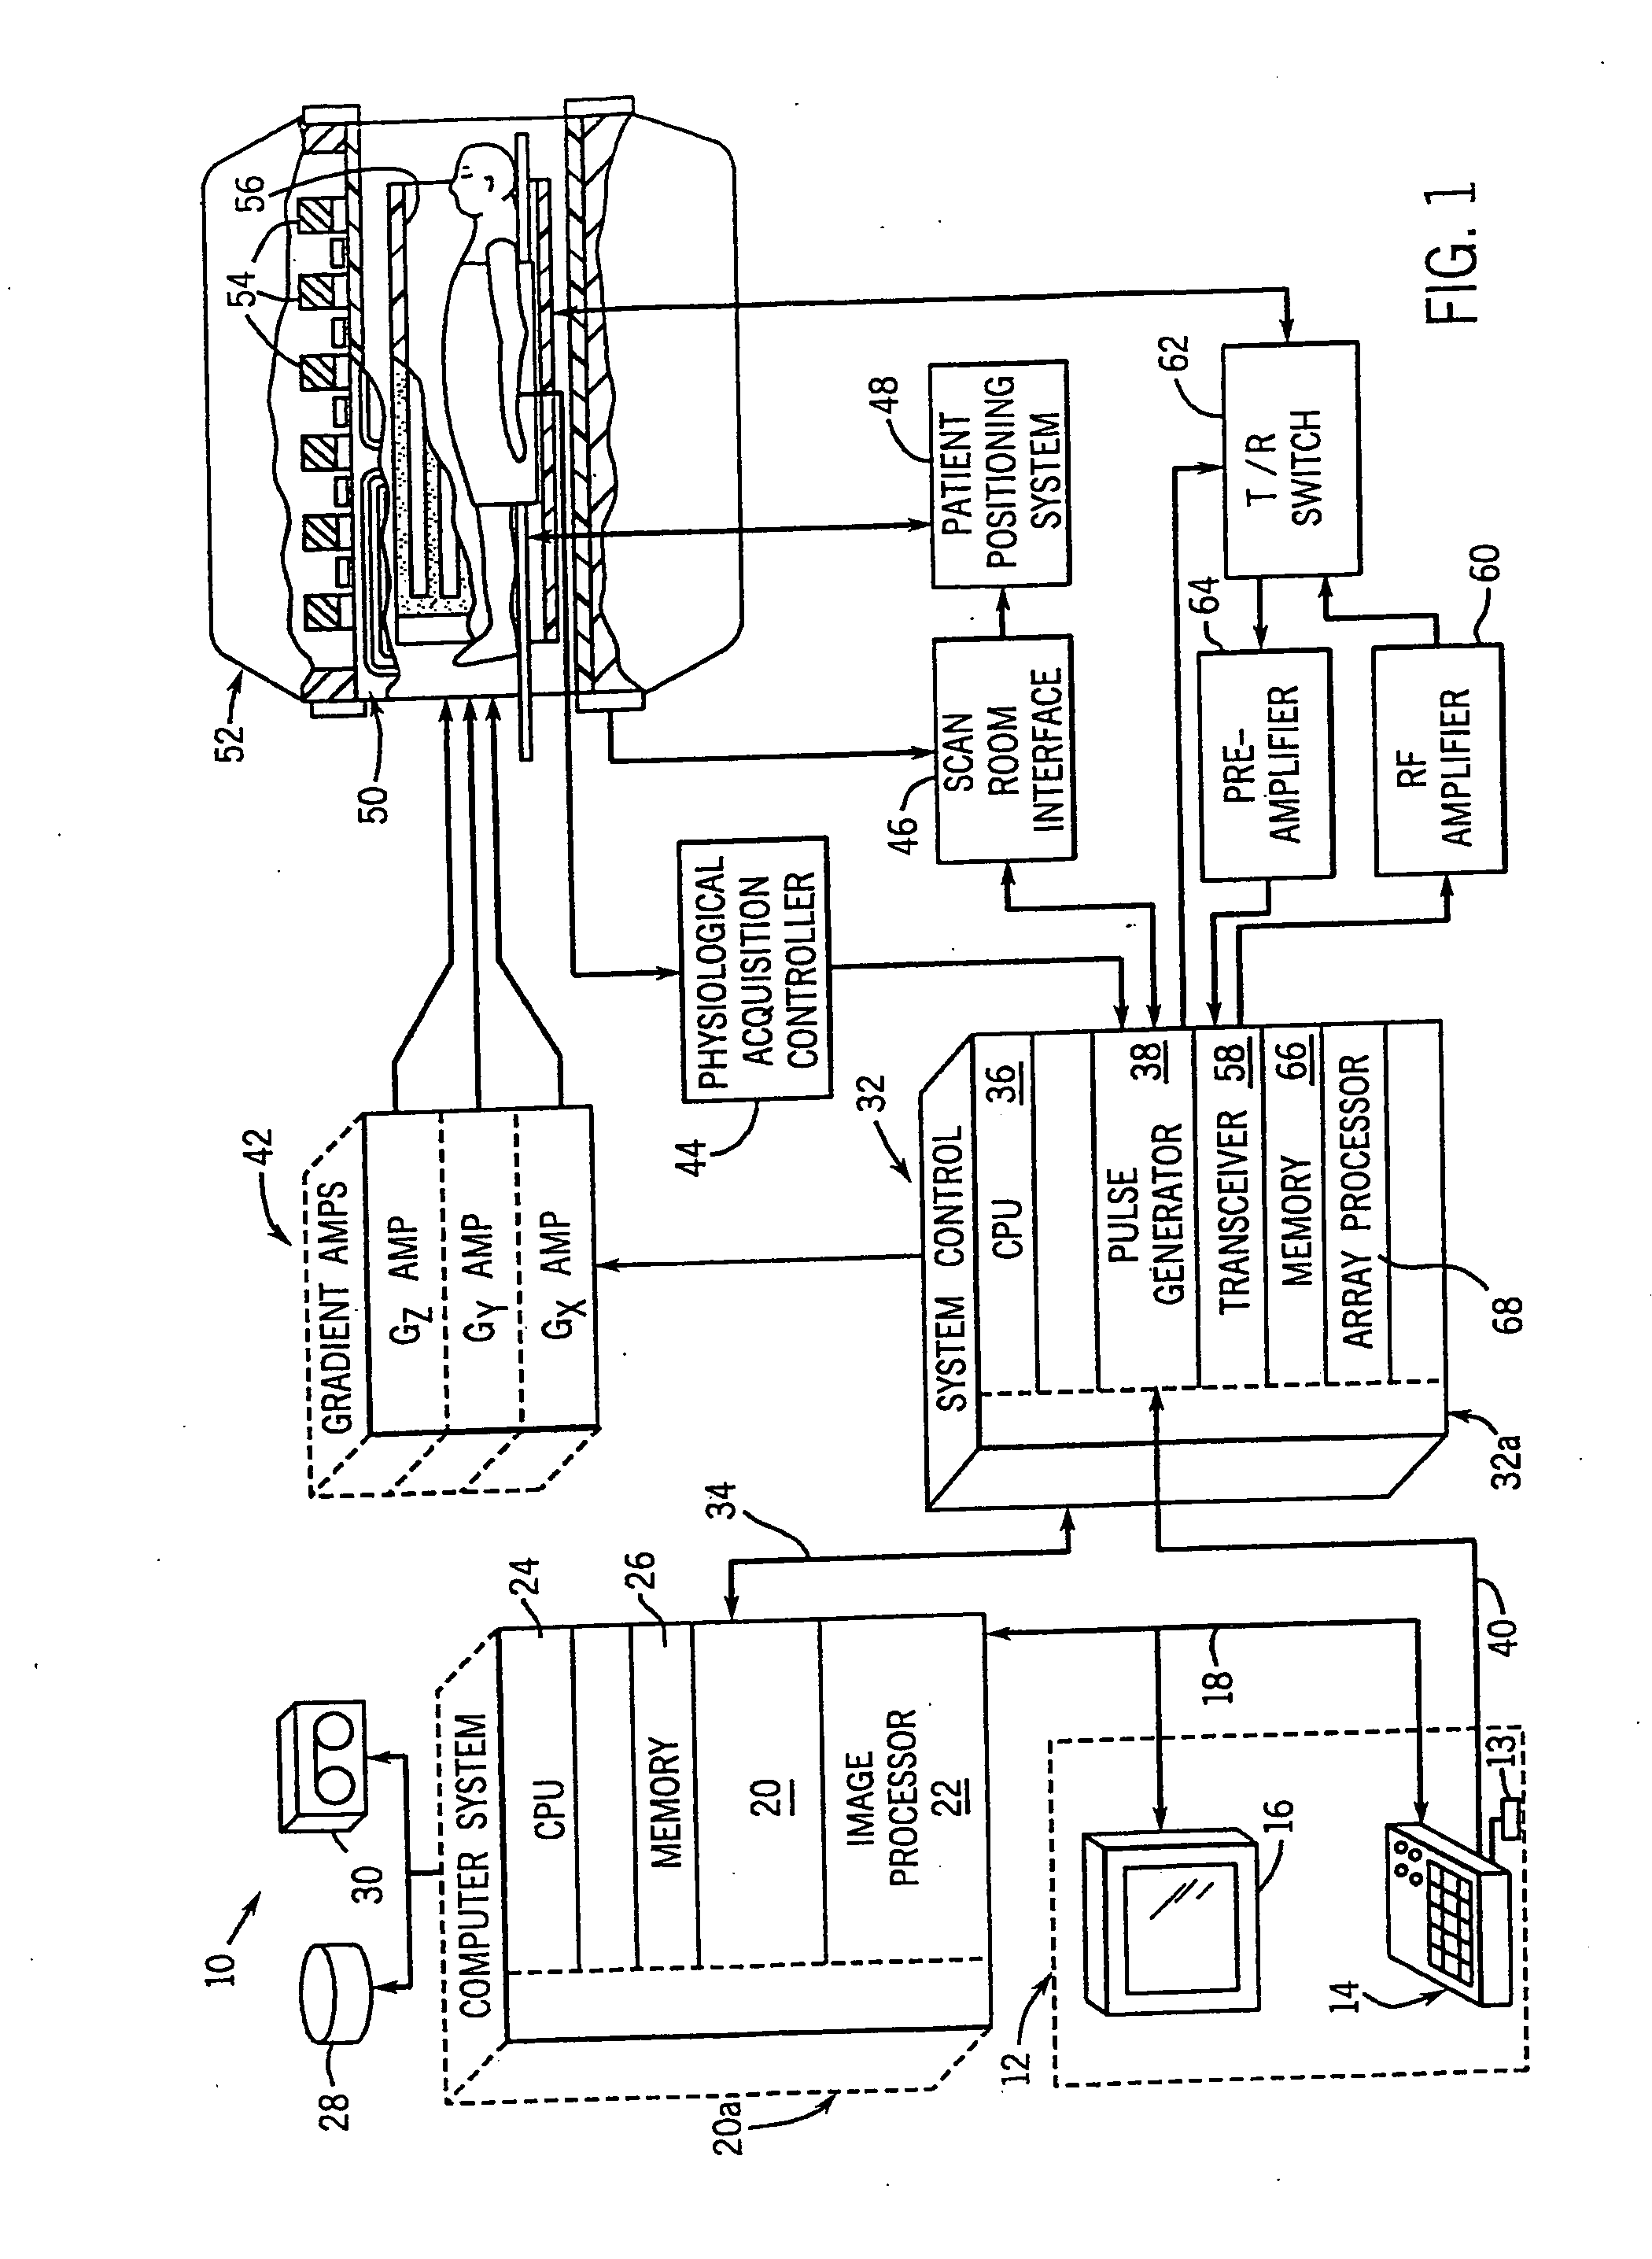 Method and system of determining parameters for MR data acquisition with real-time B1 optimization